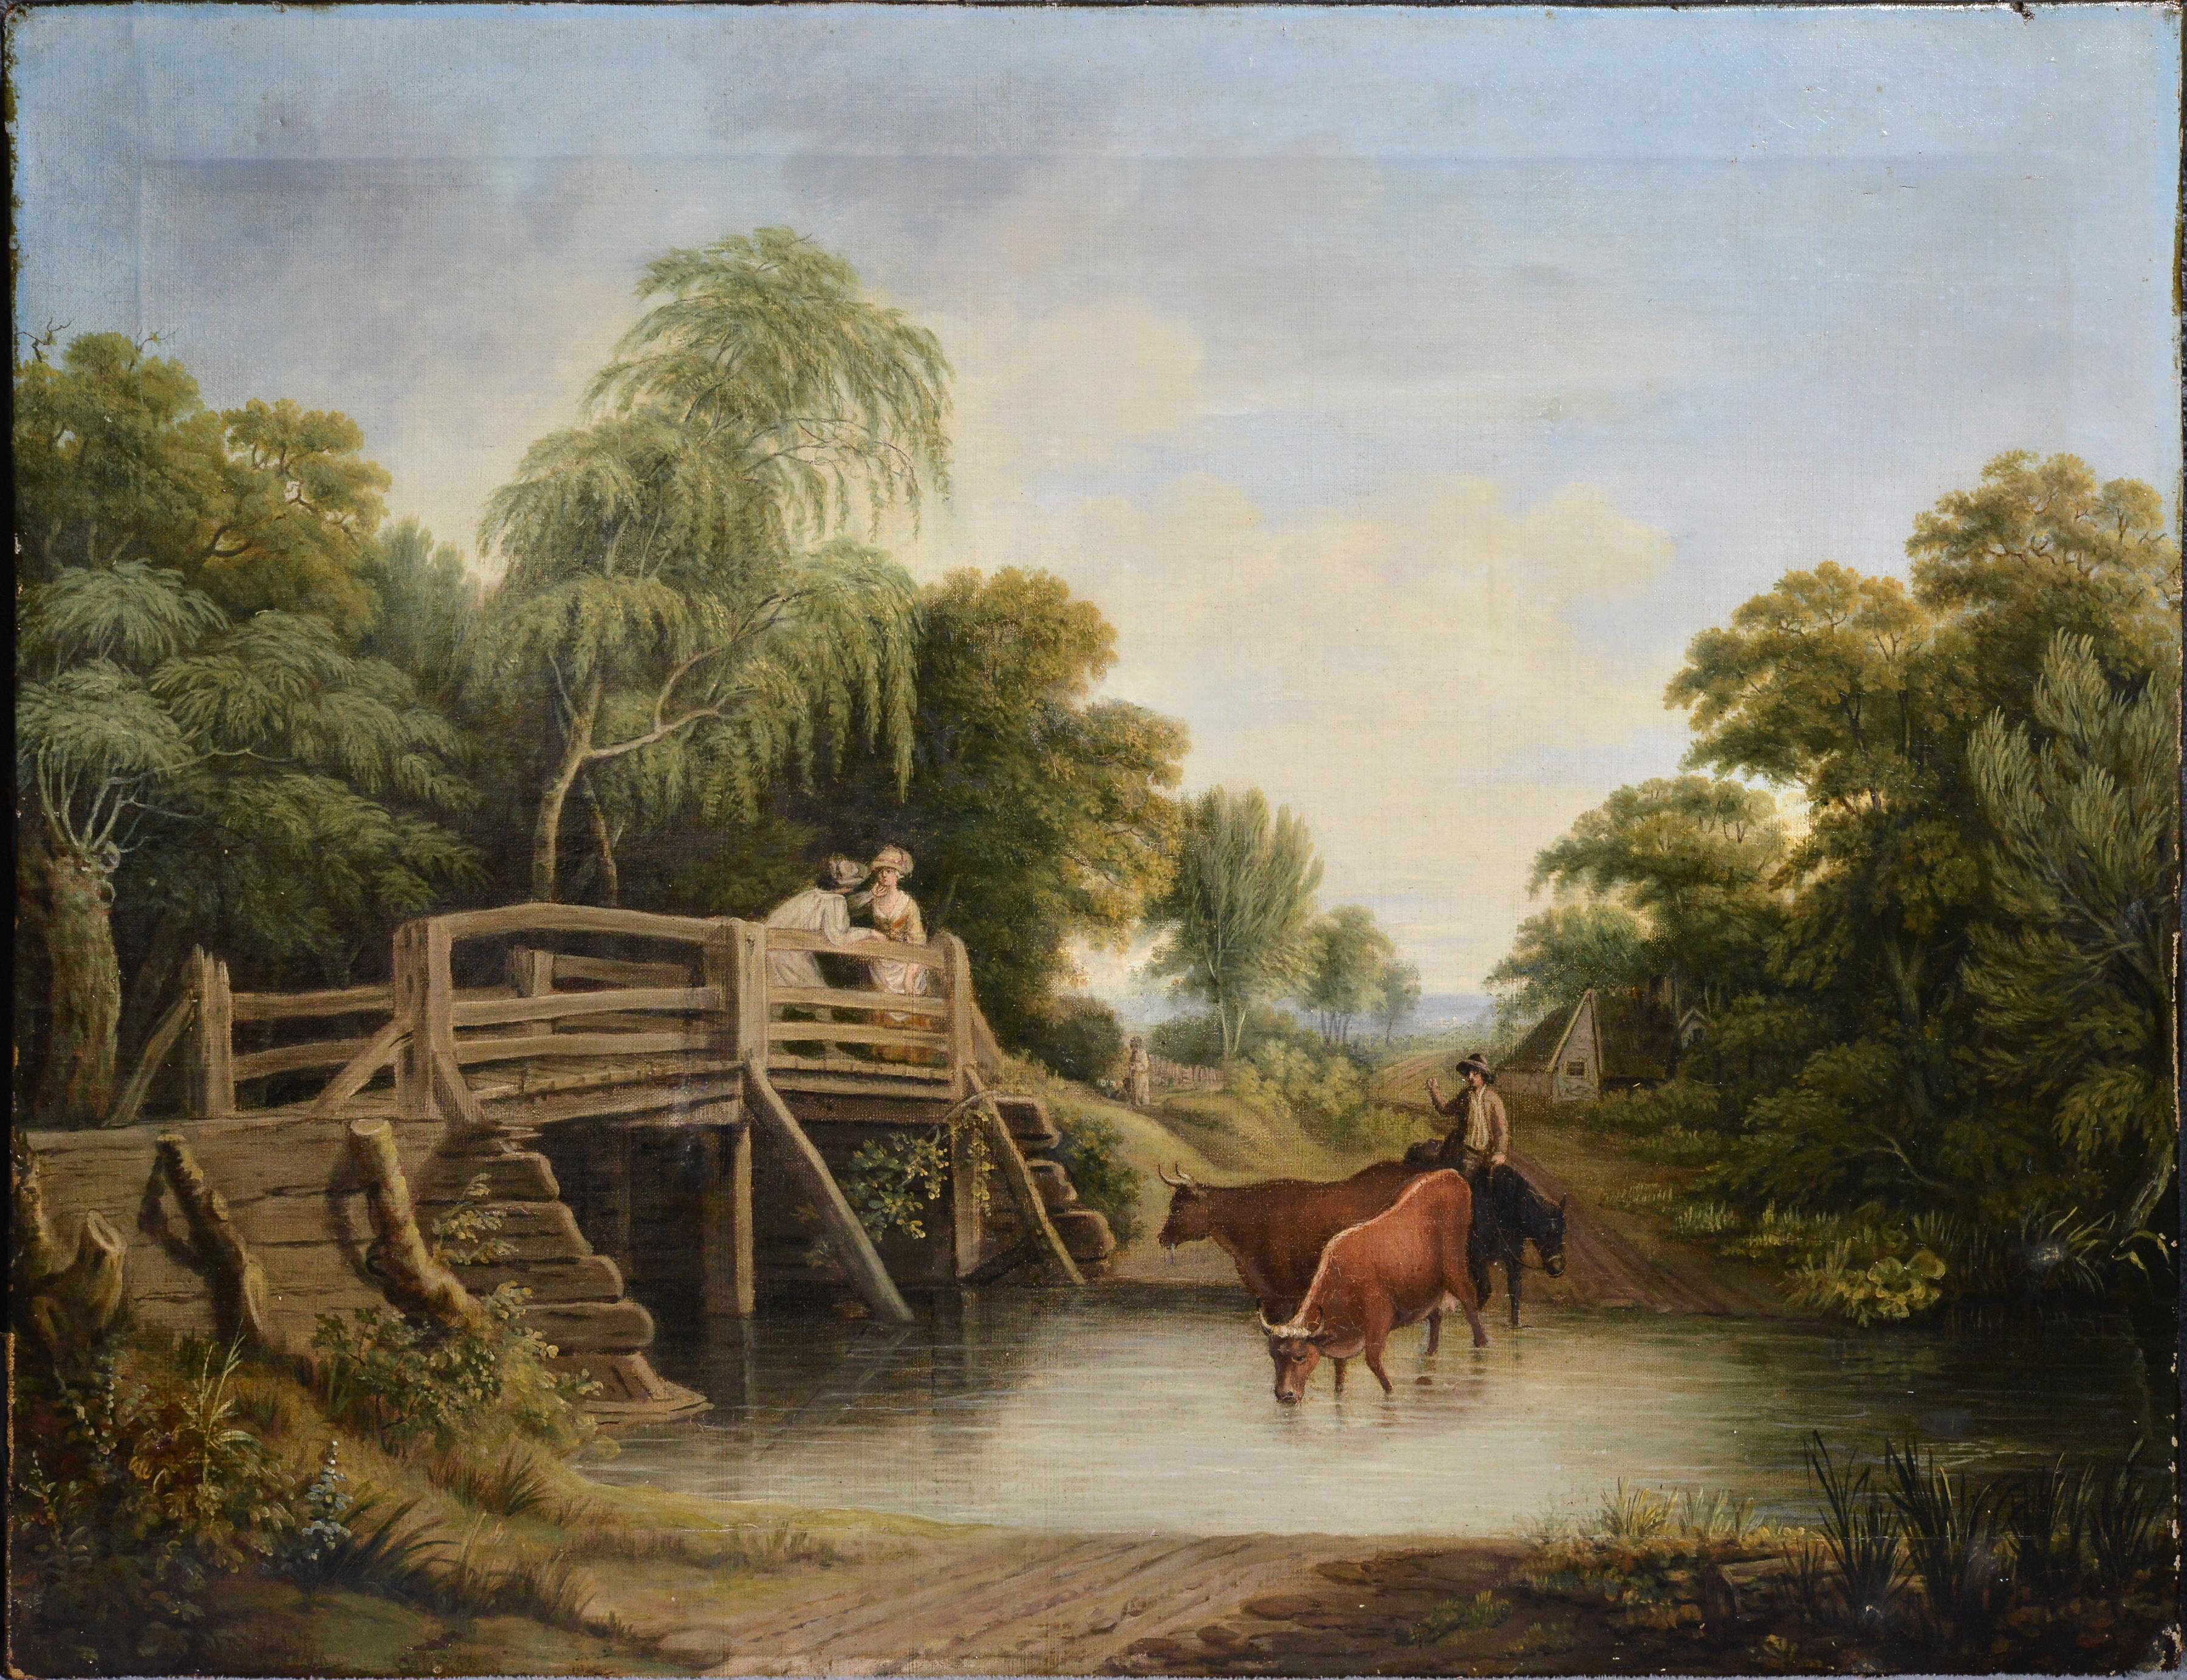 Unknown Figurative Painting - Pastoral Landscape Meeting on Bridge Early 19th century Oil Painting on Canvas